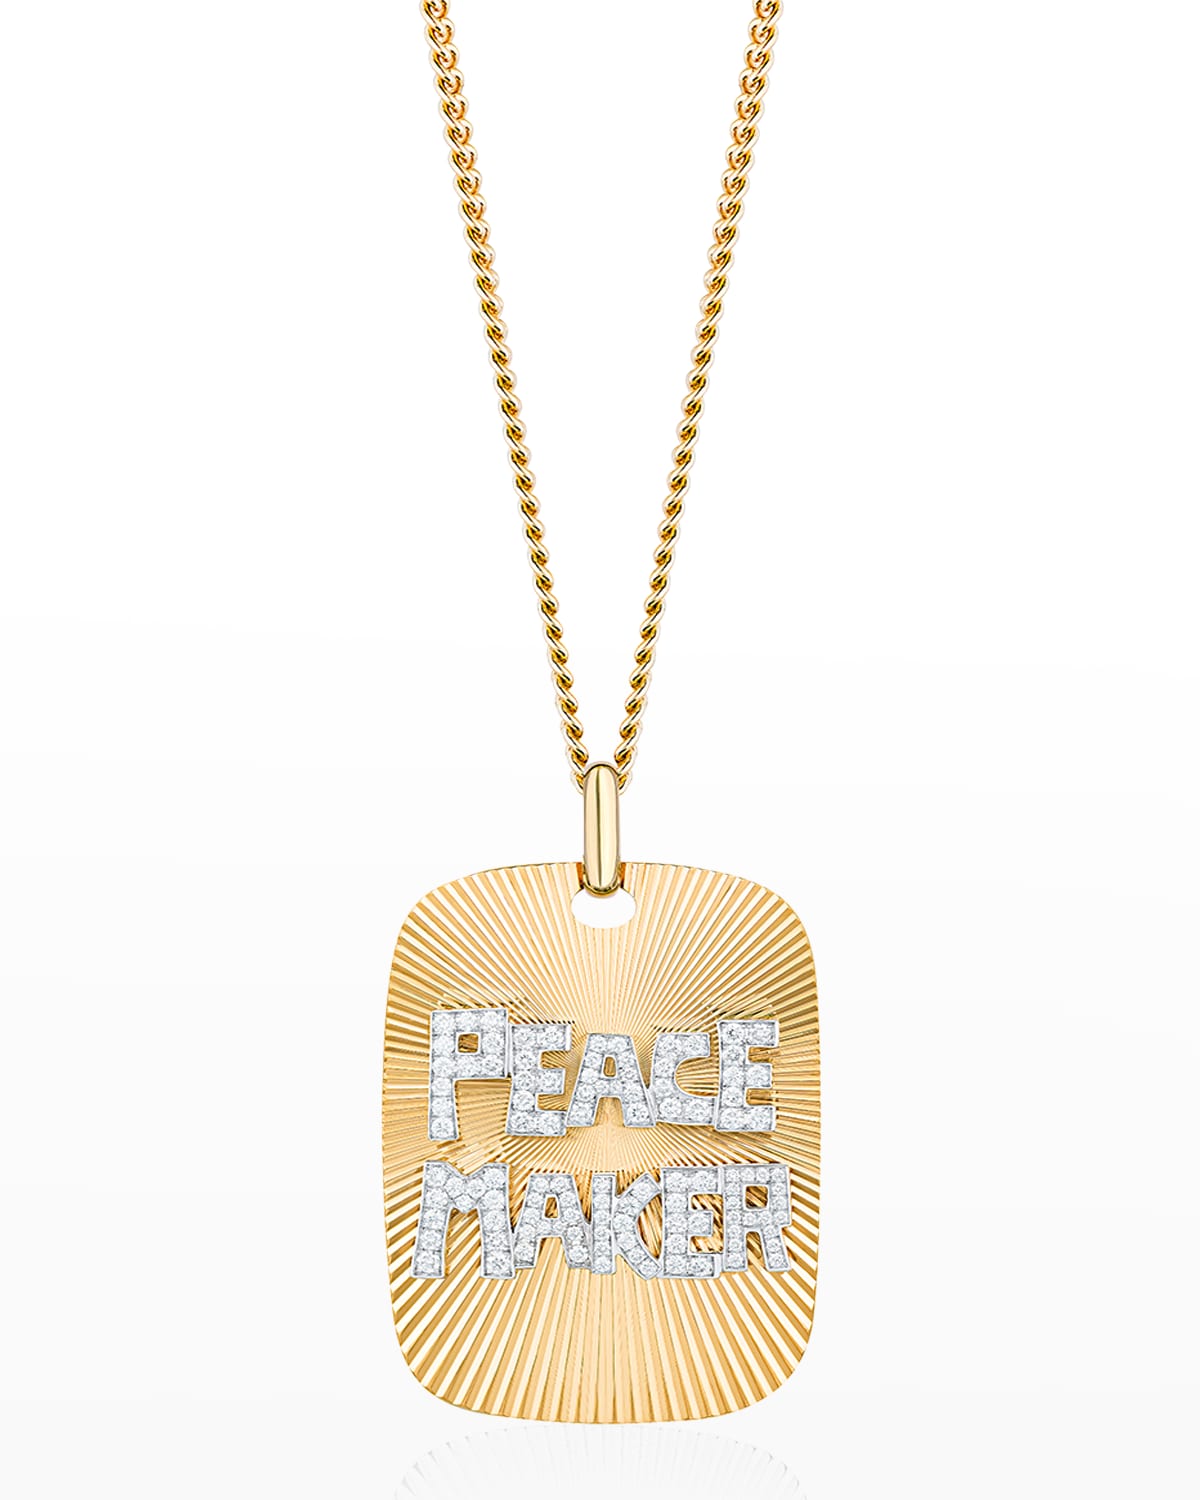 Awkn1 New Peace Maker Necklace